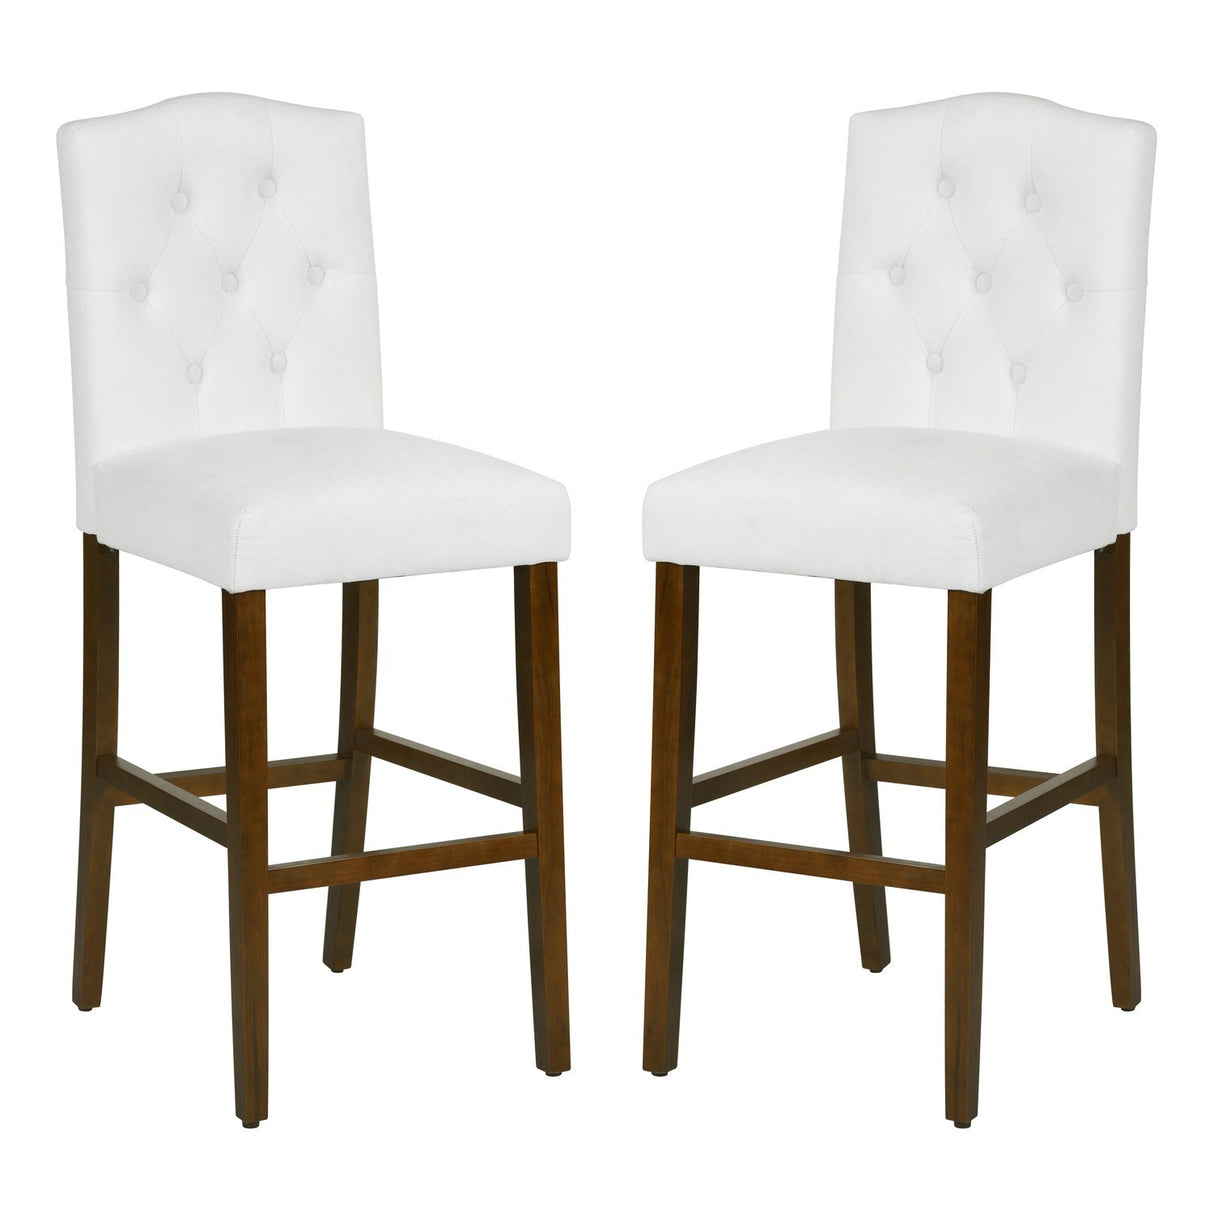 Set of 2 traditional Upholstered high stools, white - Home Elegance USA